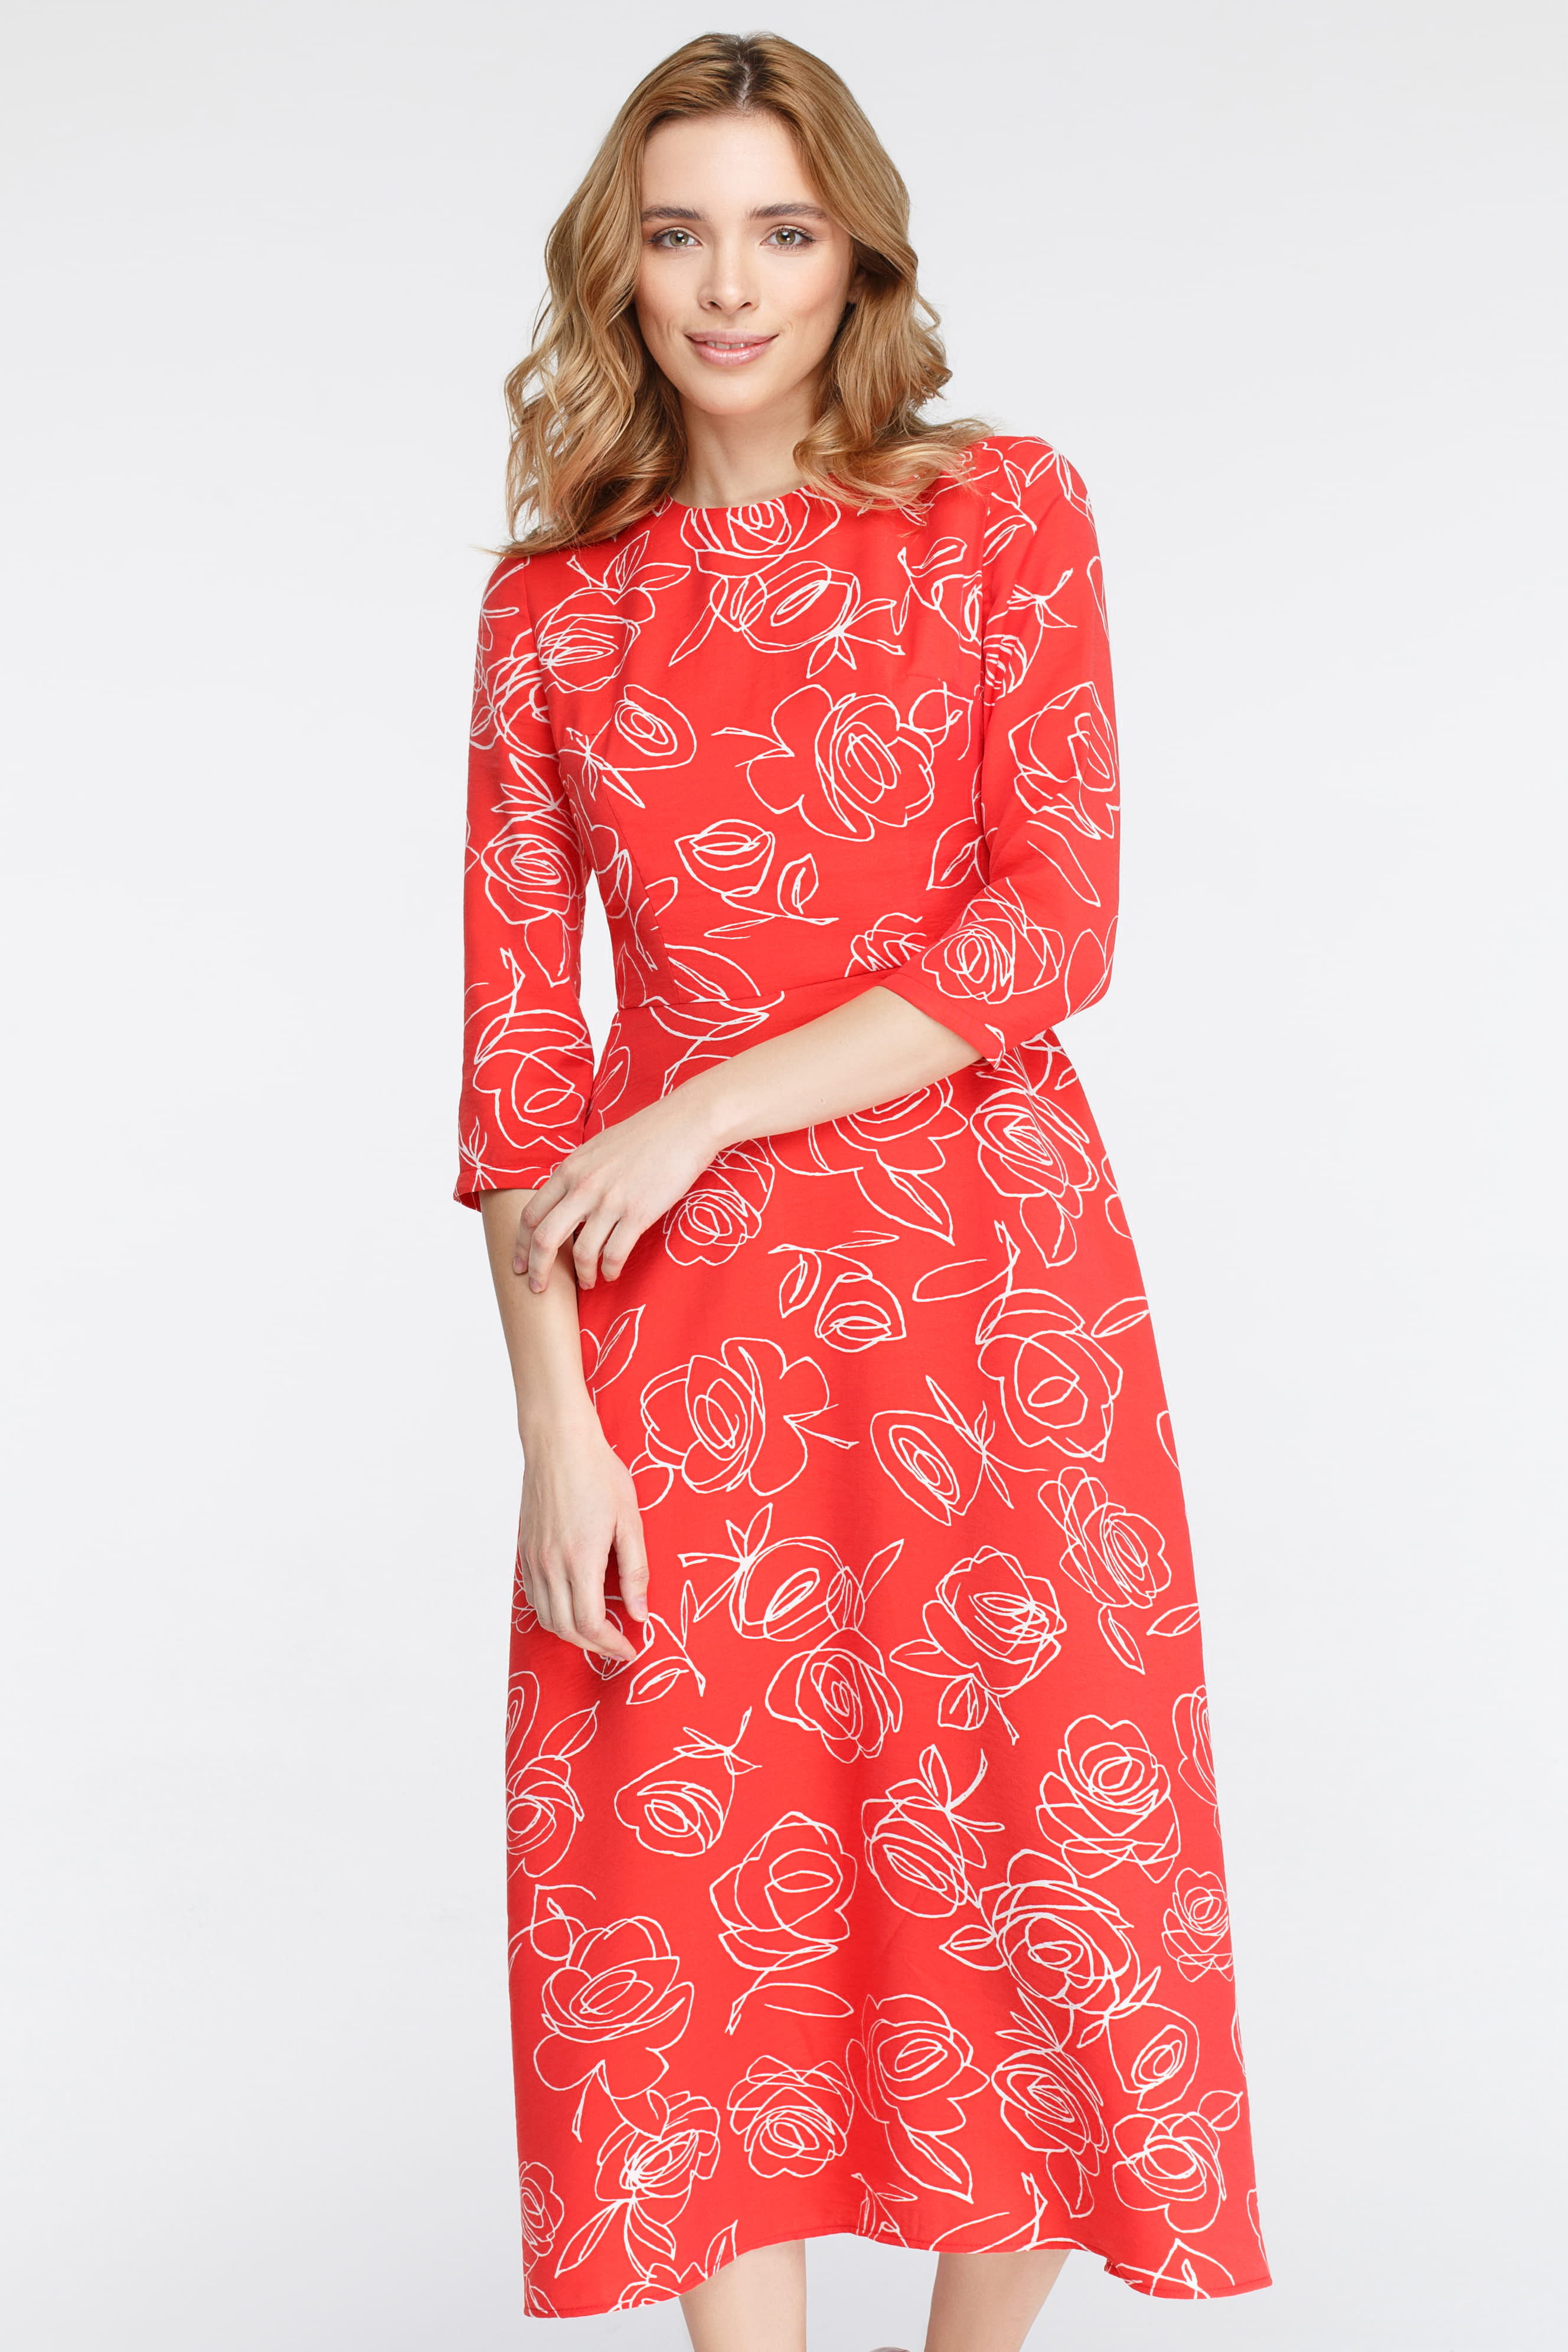 Red midi dress in floral print, photo 2